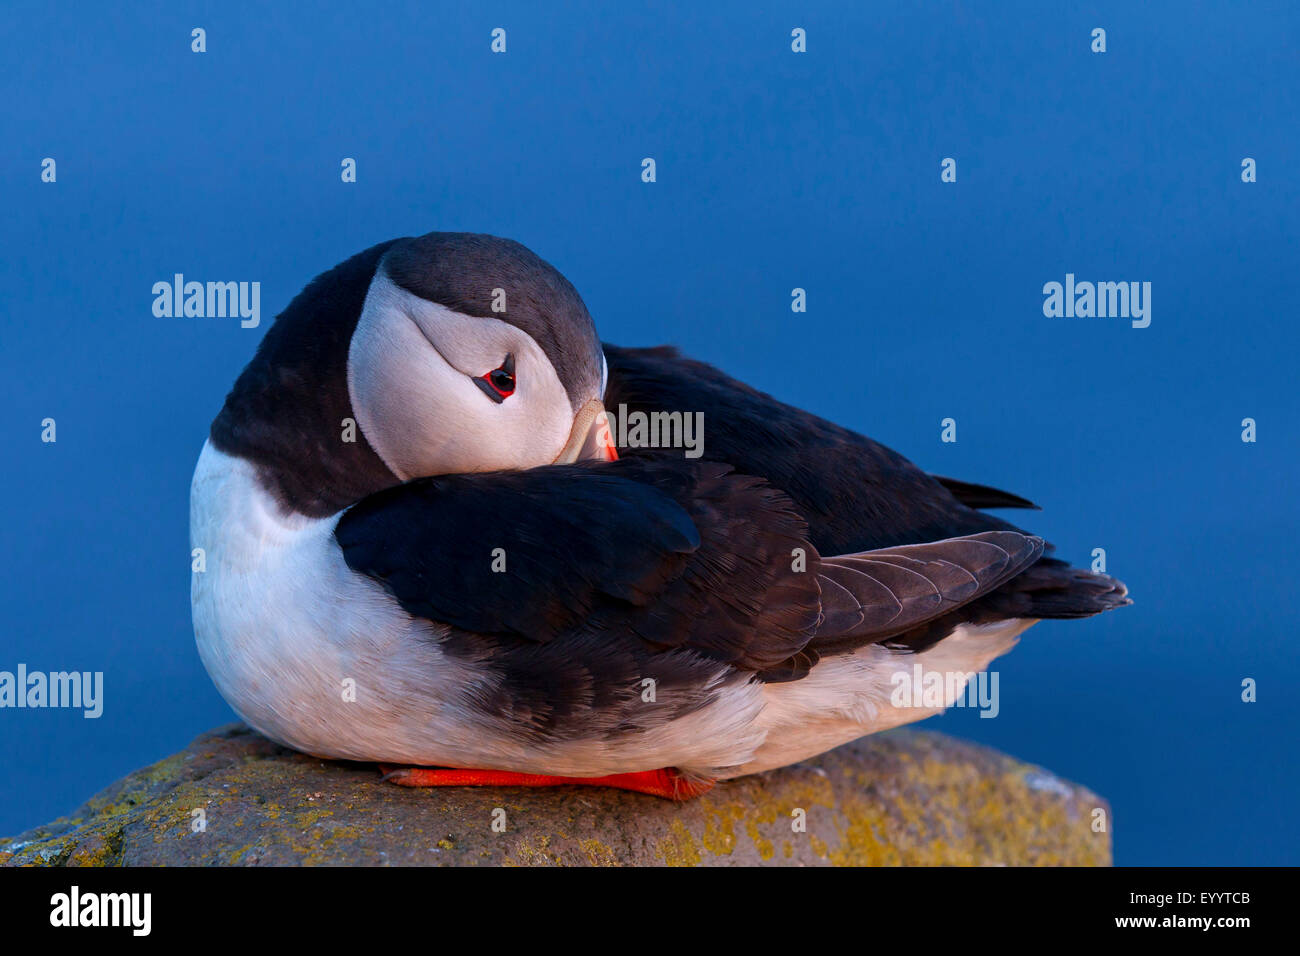 Atlantic puffin, Common puffin (Fratercula arctica), lying on a stone and sticking the head into the plumage, Iceland, Vestfirdir, Hvallaetur Stock Photo